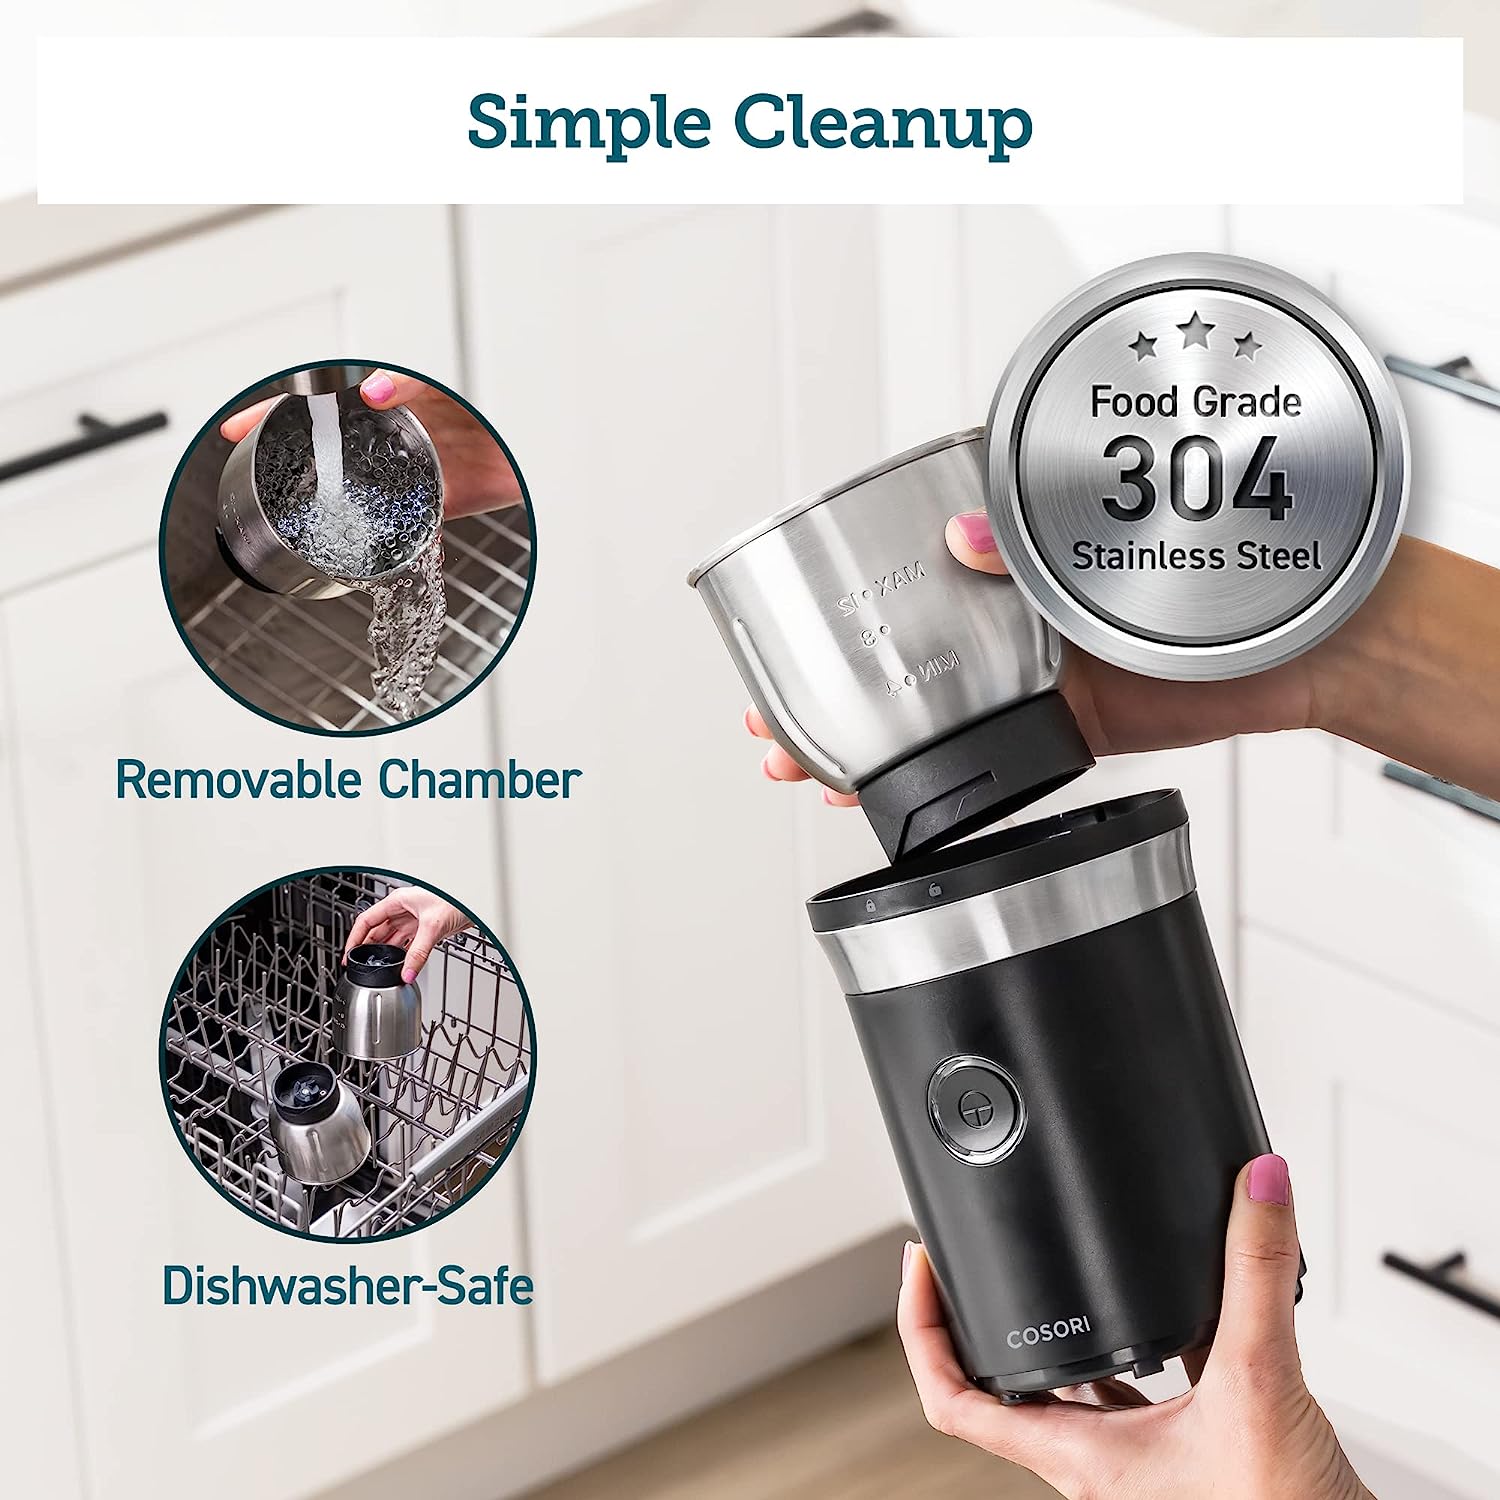 https://bigbigmart.com/wp-content/uploads/2023/10/COSORI-Electric-Coffee-Grinders-for-Spices-Seeds-Herbs-and-Coffee-Beans-Spice-Blender-and-Espresso-Grinder-Wet-and-Dry-Grinder-Included-2-Removable-Stainless-Steel-Bowls-Black5-1.jpg